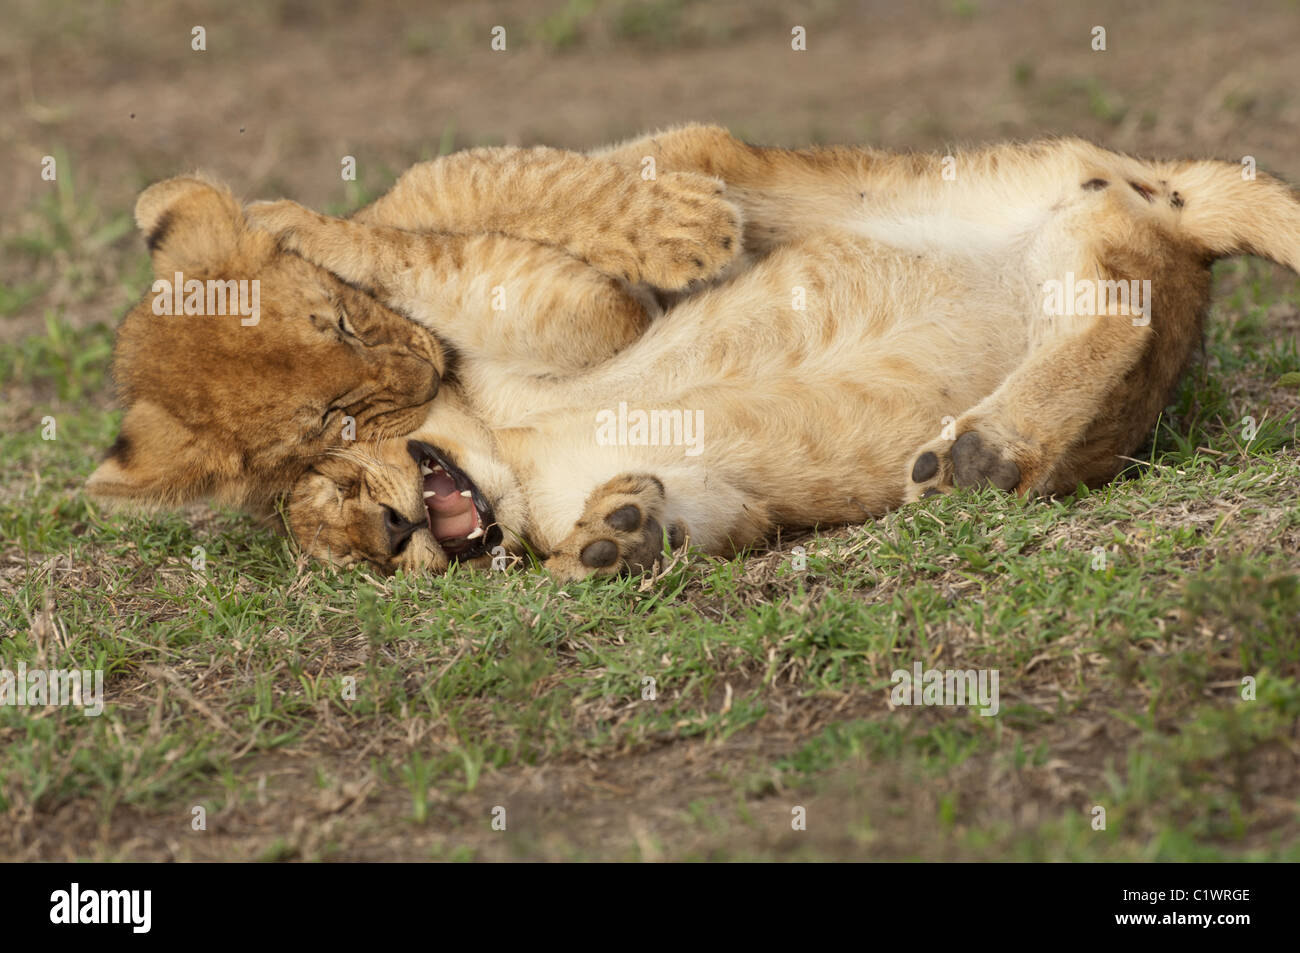 Stock photo of two lion cubs wrestling. Stock Photo